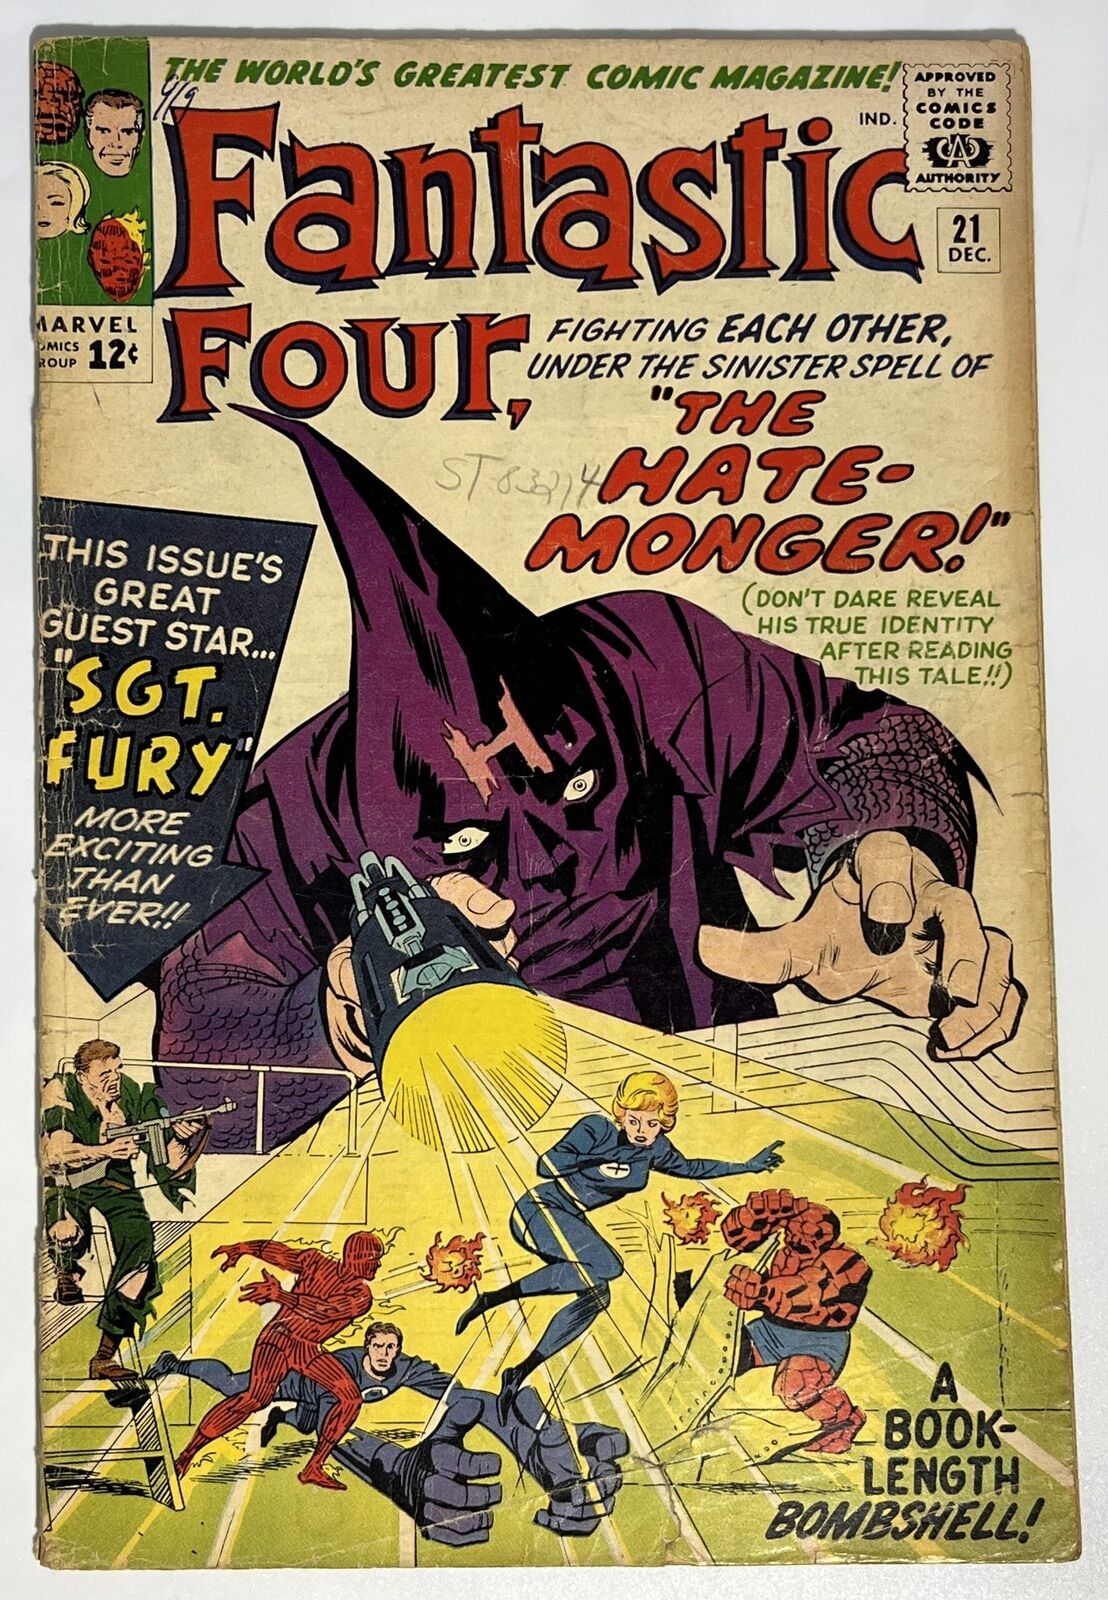 Fantastic Four #21 (1963) in 3.0 Good/Very Good